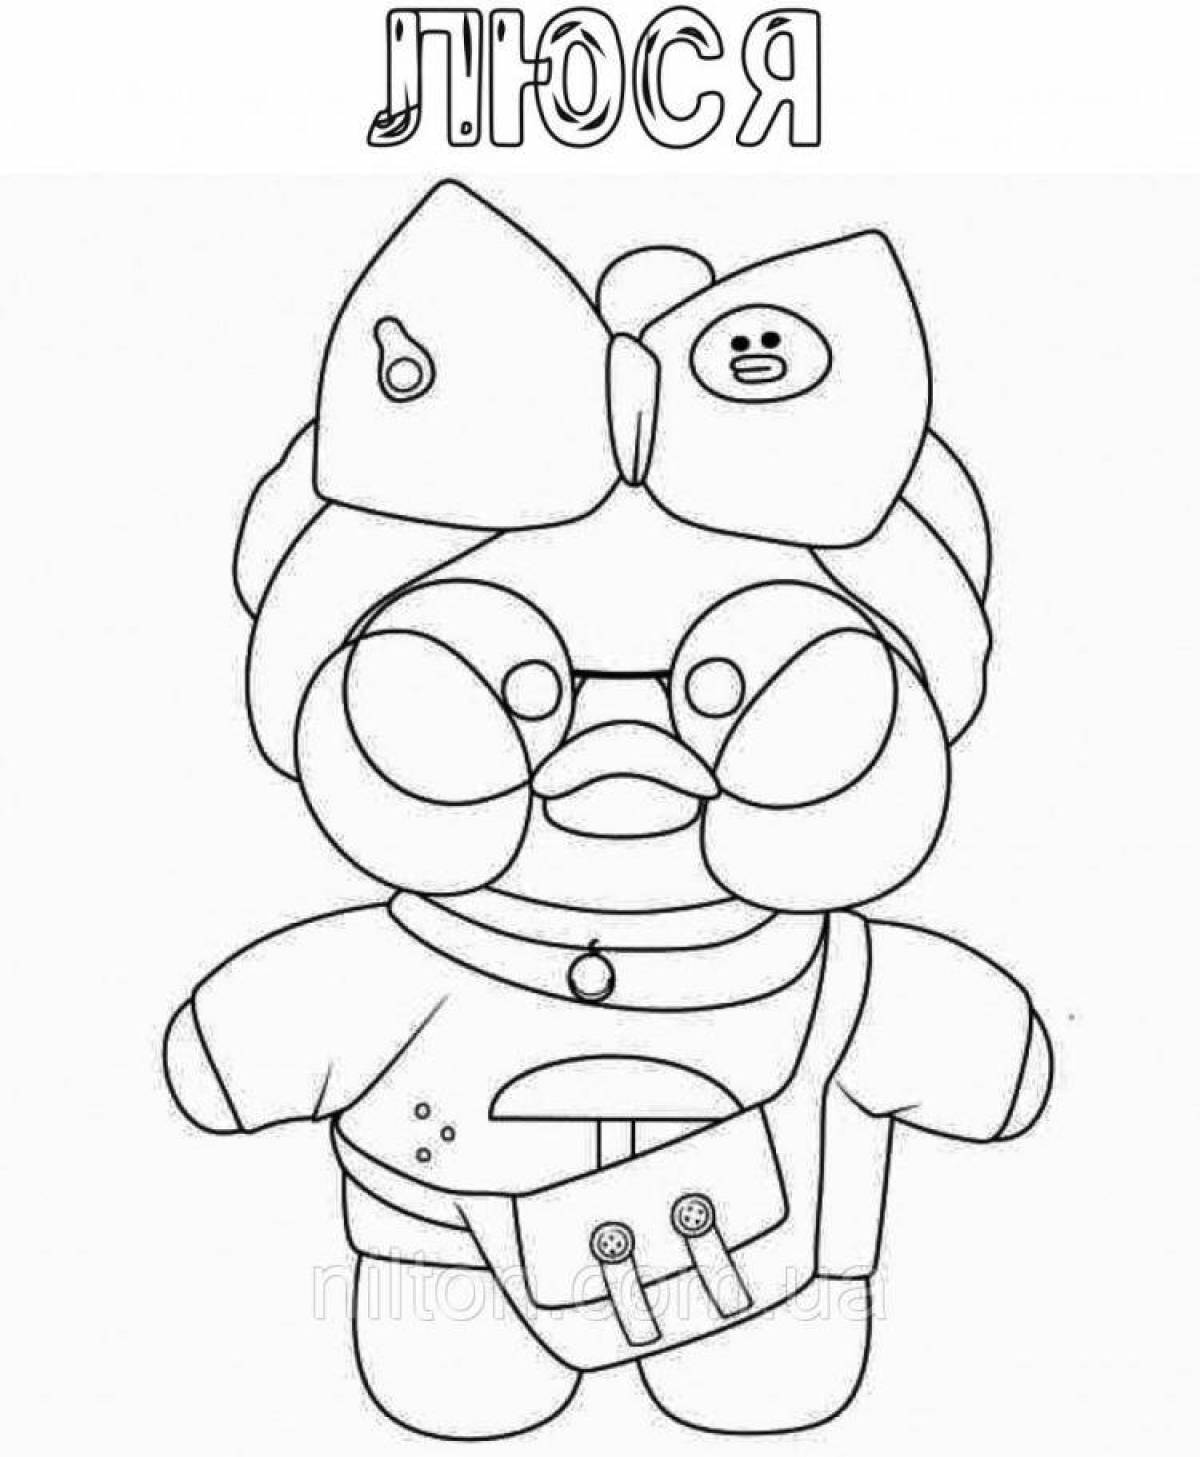 Delightful ooty lalafan coloring page